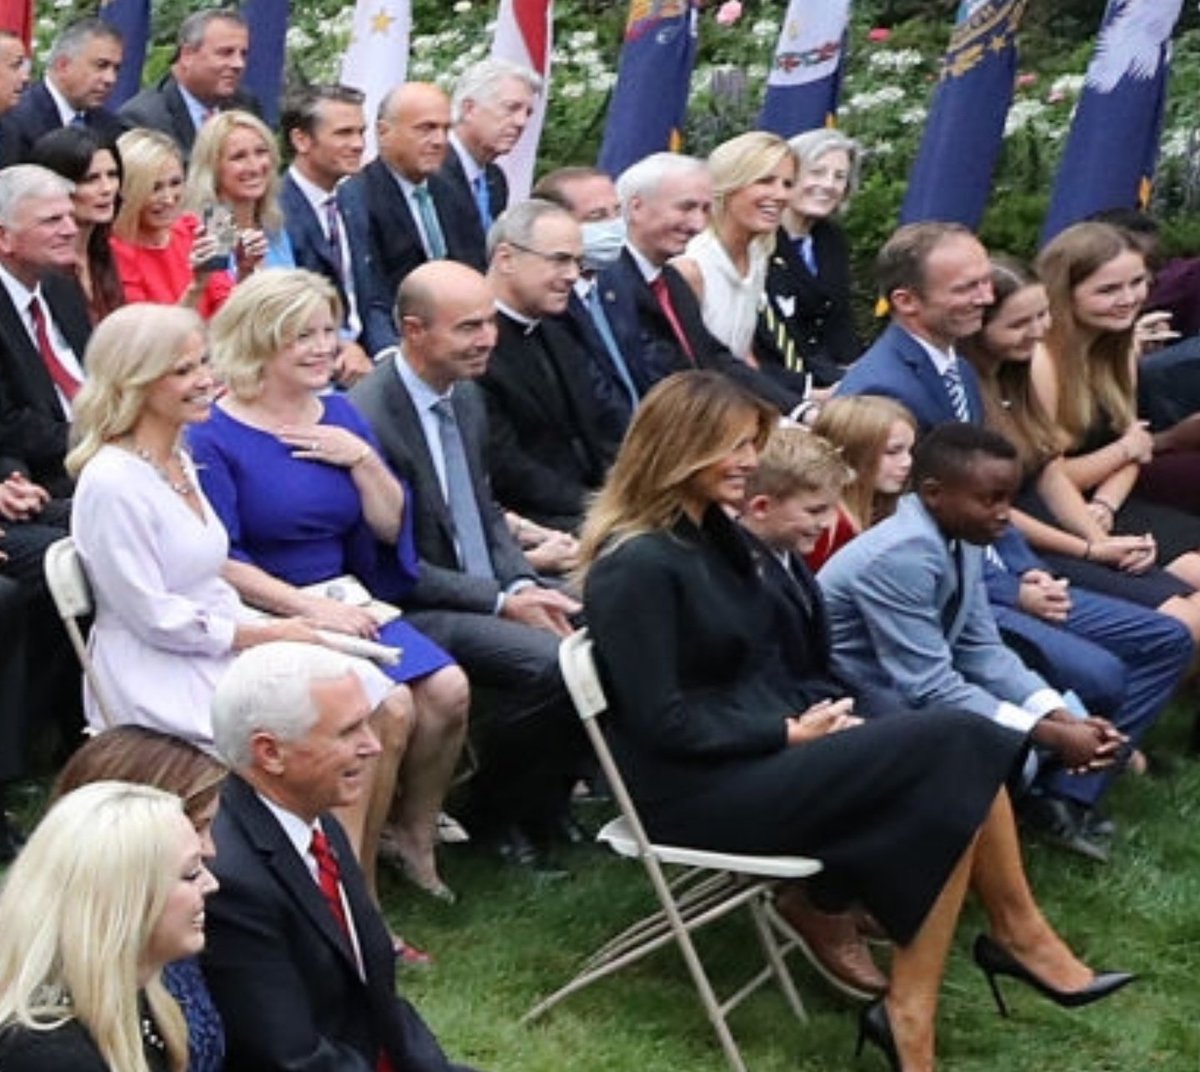 Amy Coney Barrett's children with no masks, seated next to Melania Trump who is now positiveNo social distancing